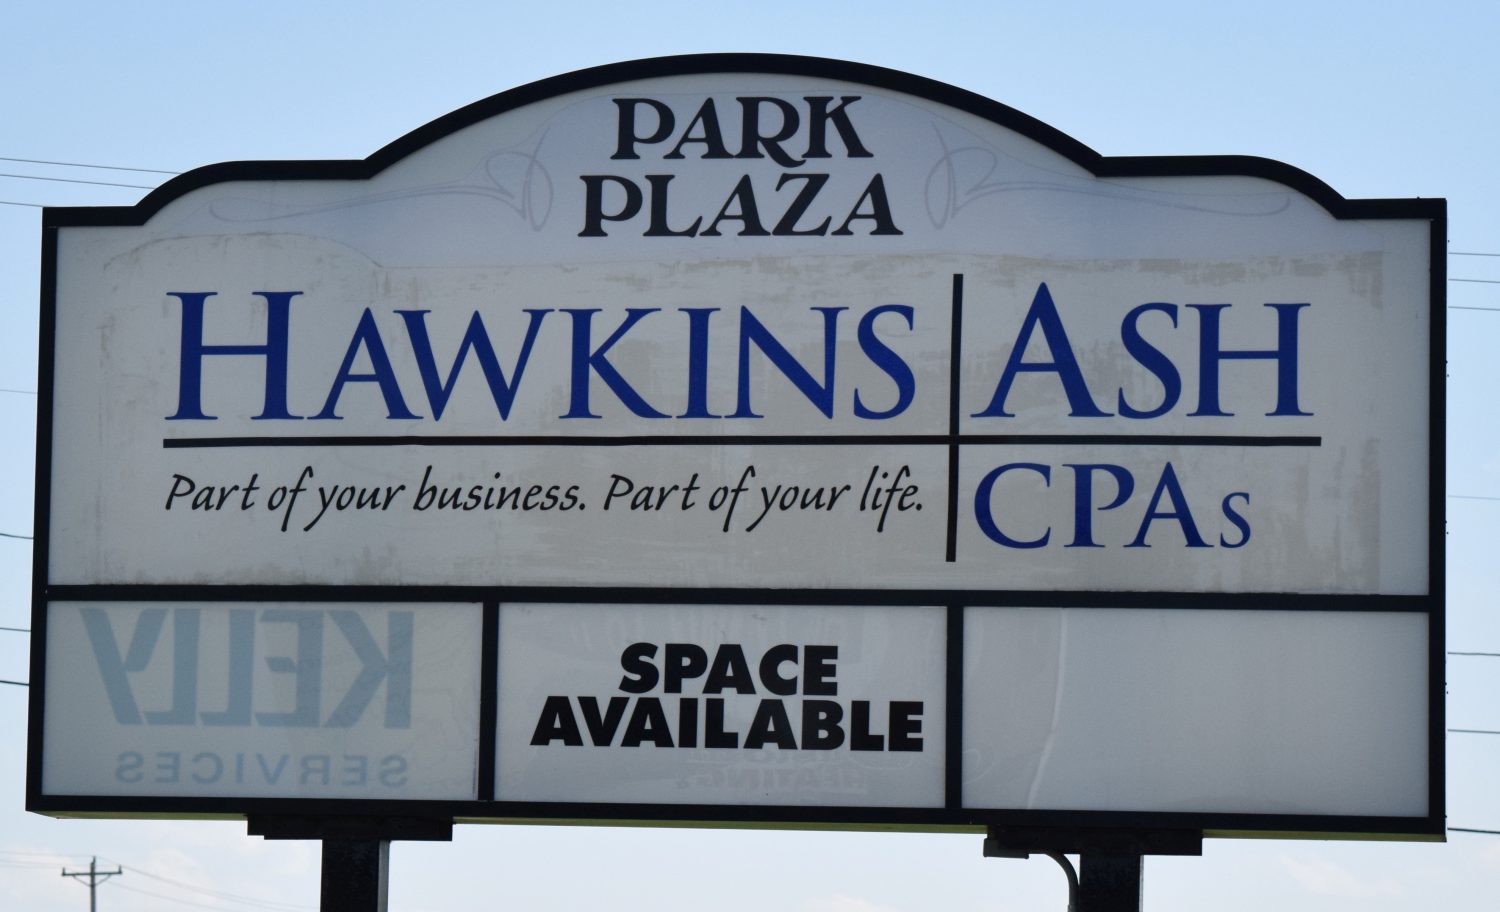 Hawkins Ash CPAs’ has expanded significantly over the course of 60 years.